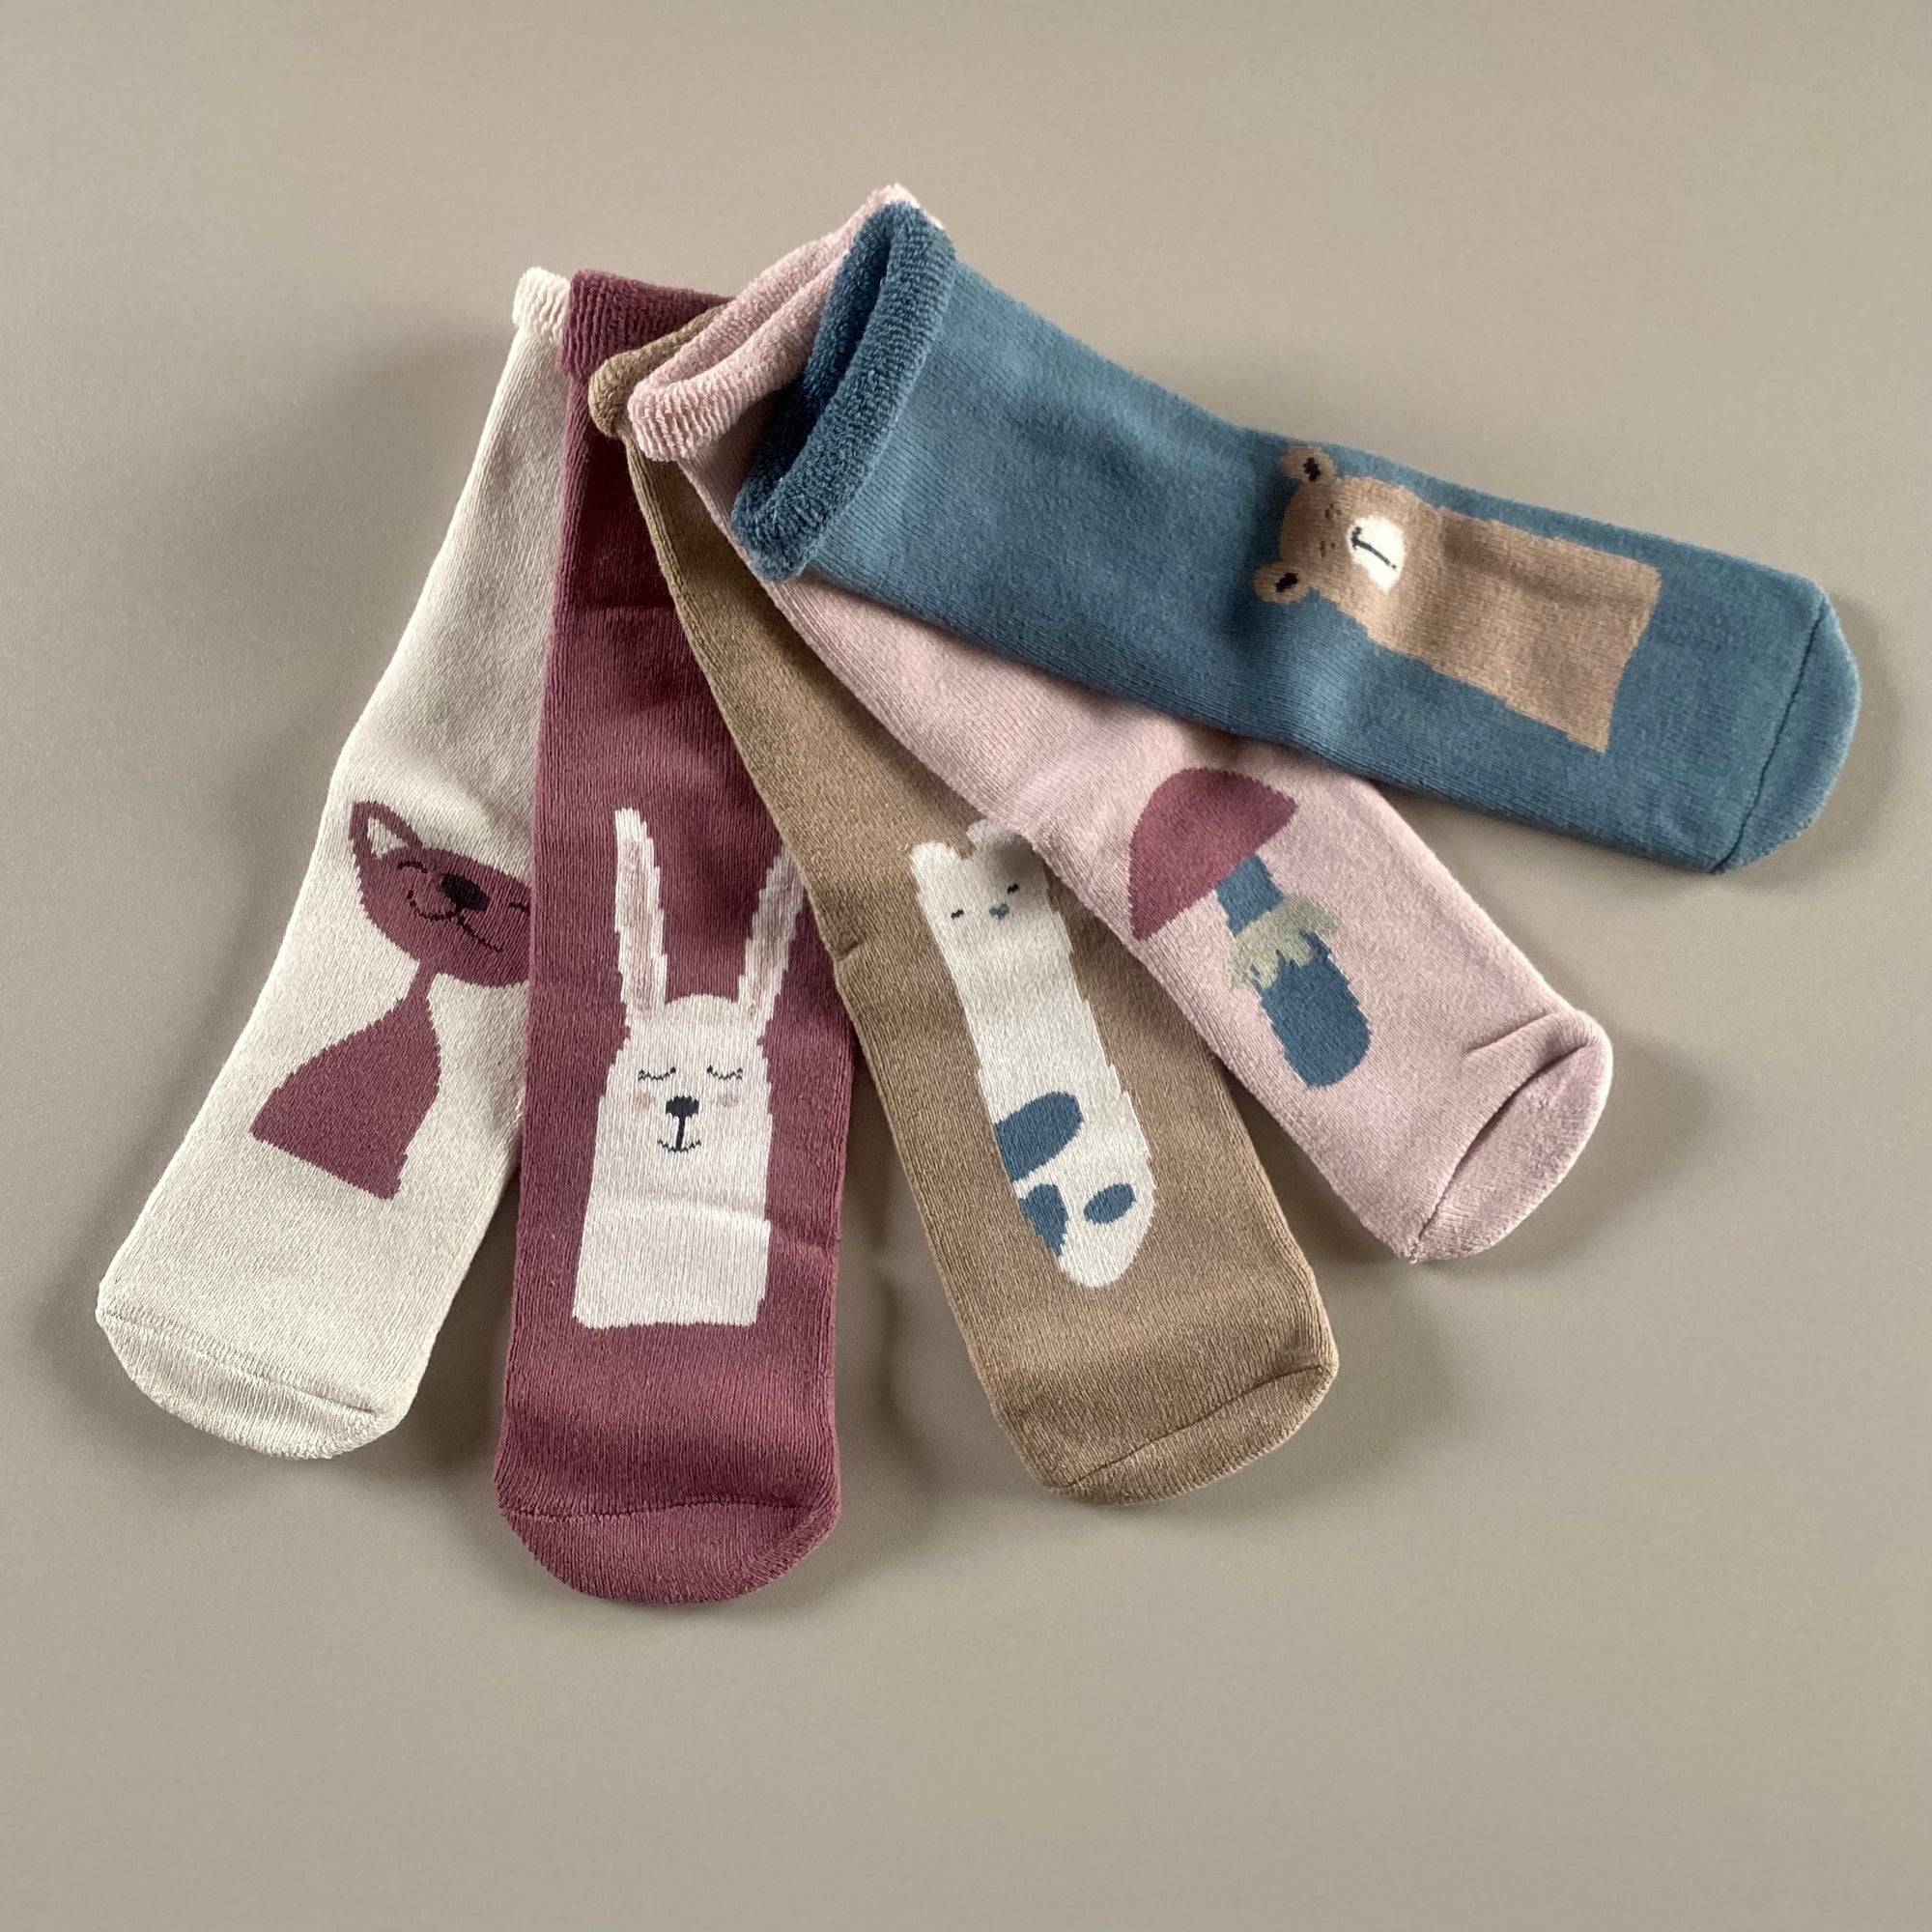 Cozy Socks find Stylish Fashion for Little People- at Little Foxx Concept Store